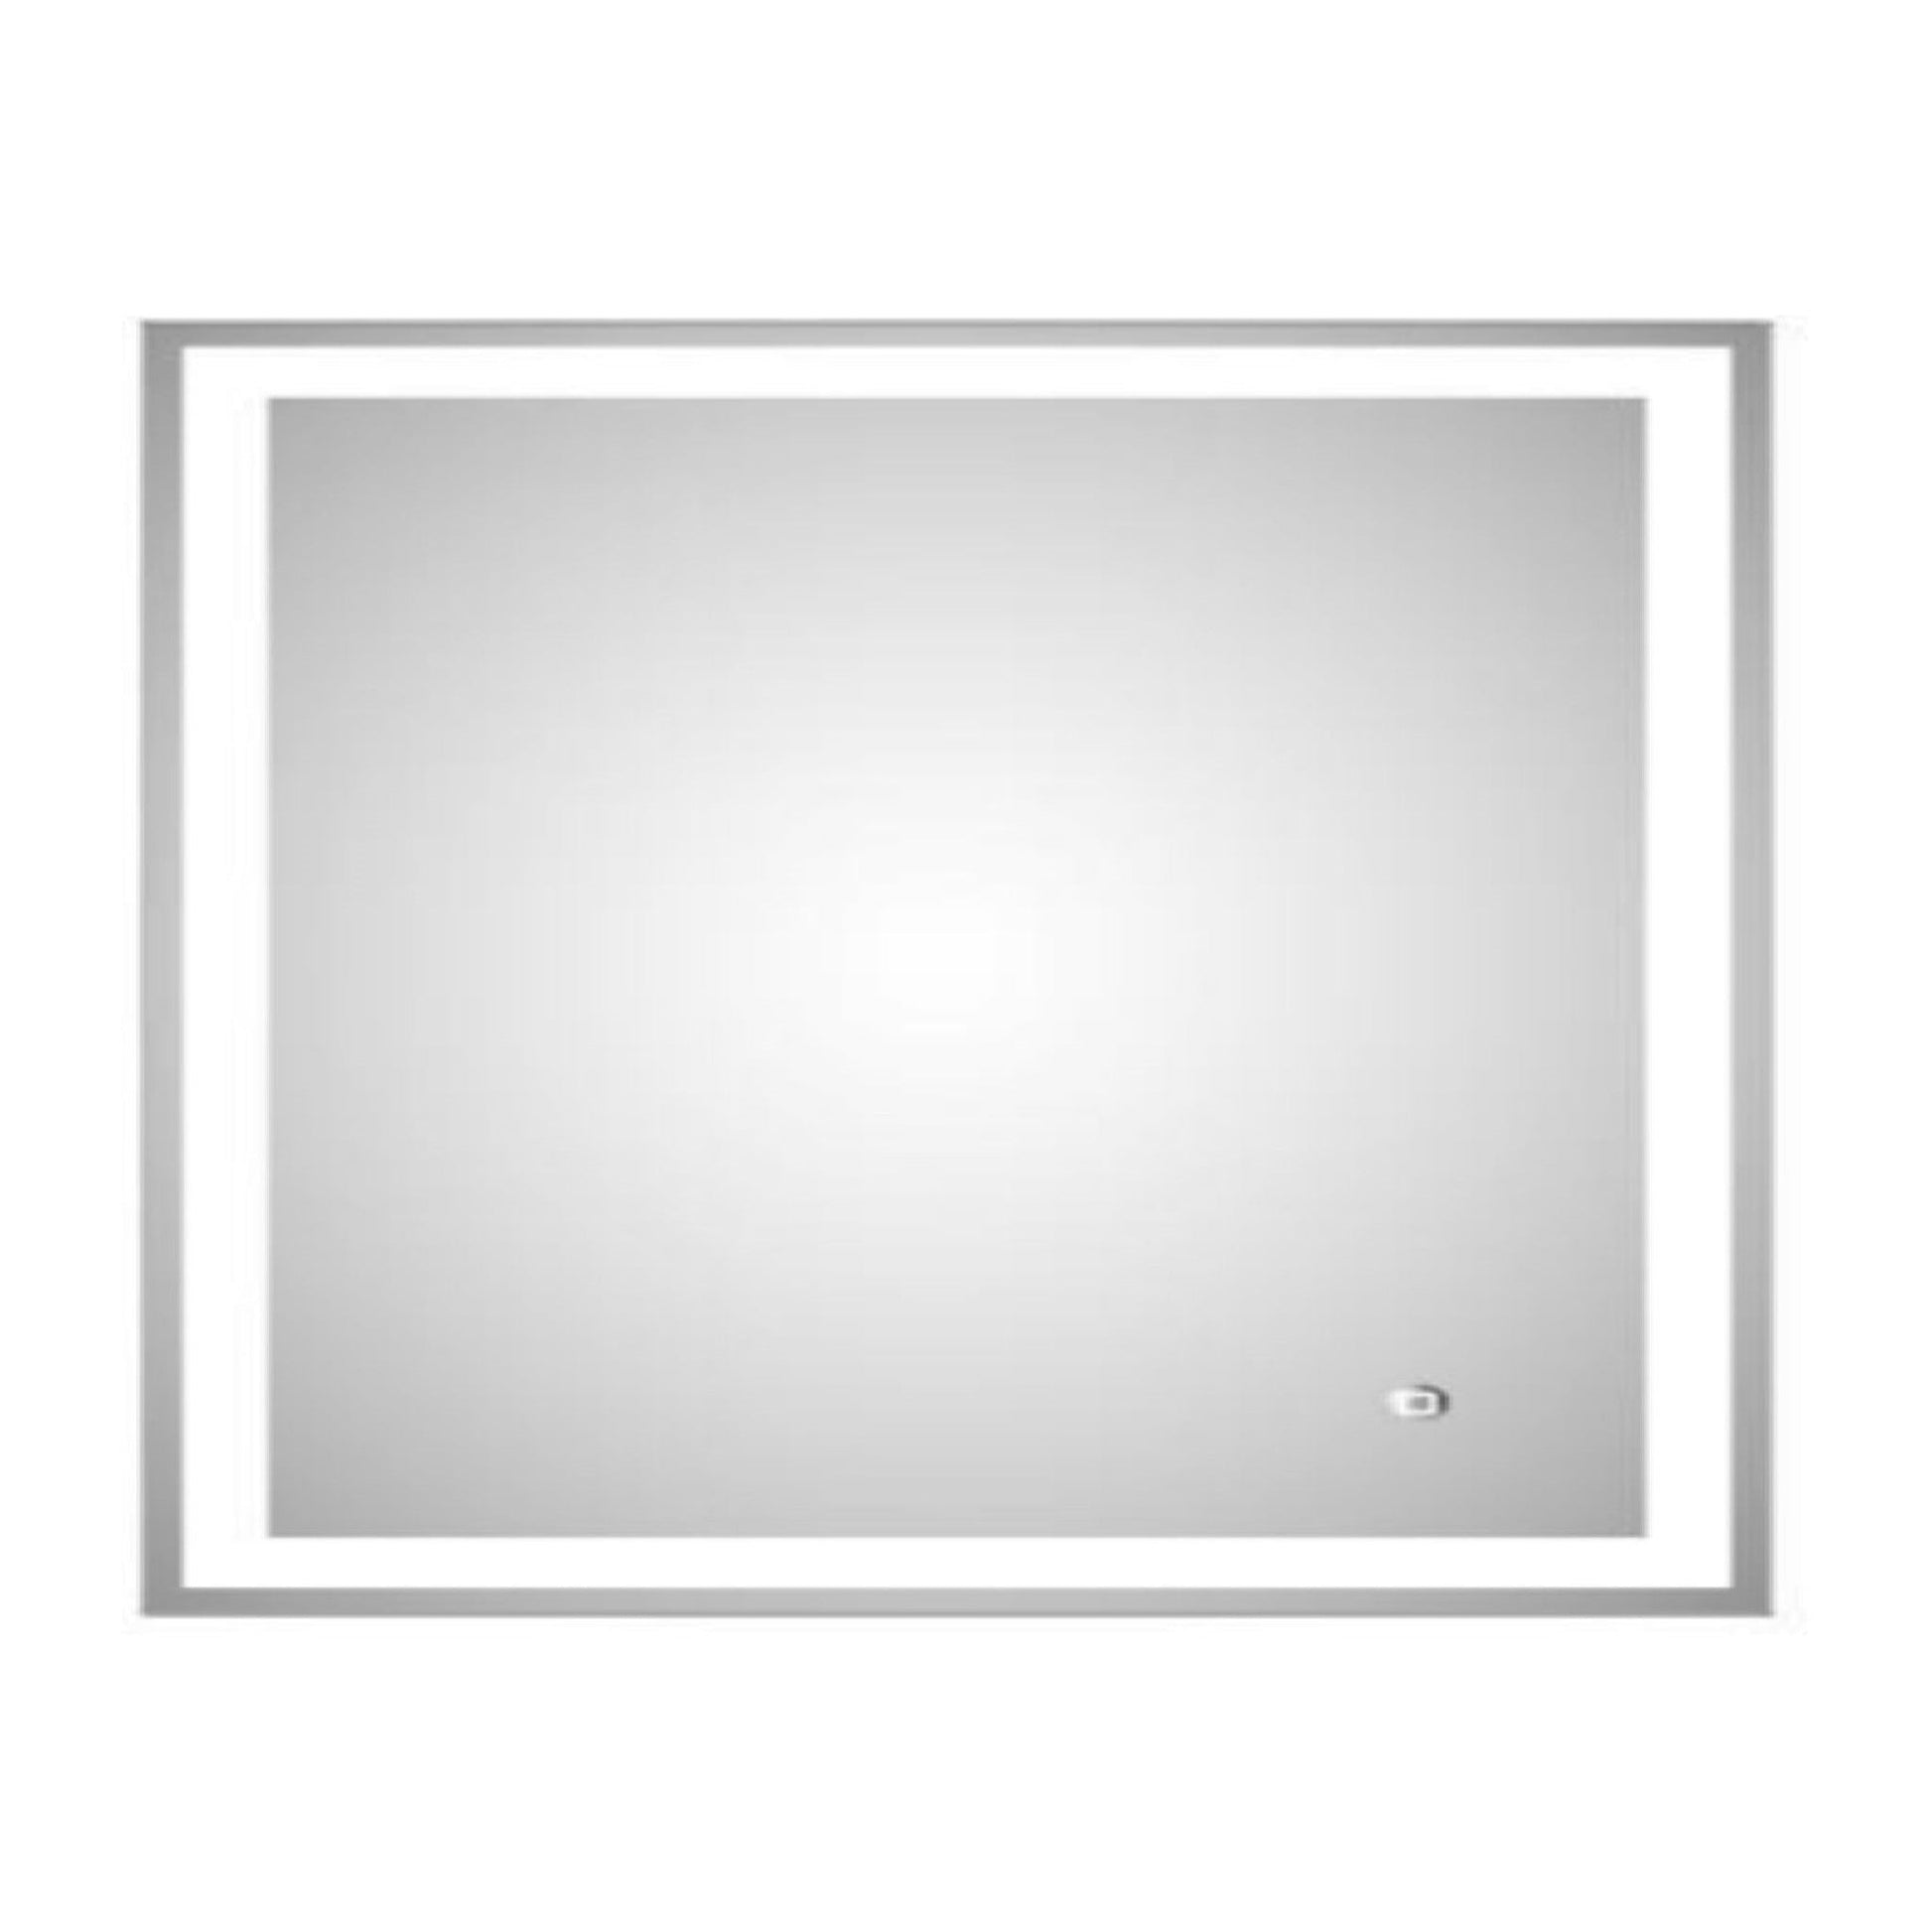 Duko Aurora 36" x 30" Bathroom Vanity LED Mirror With Touch Switch and Demister